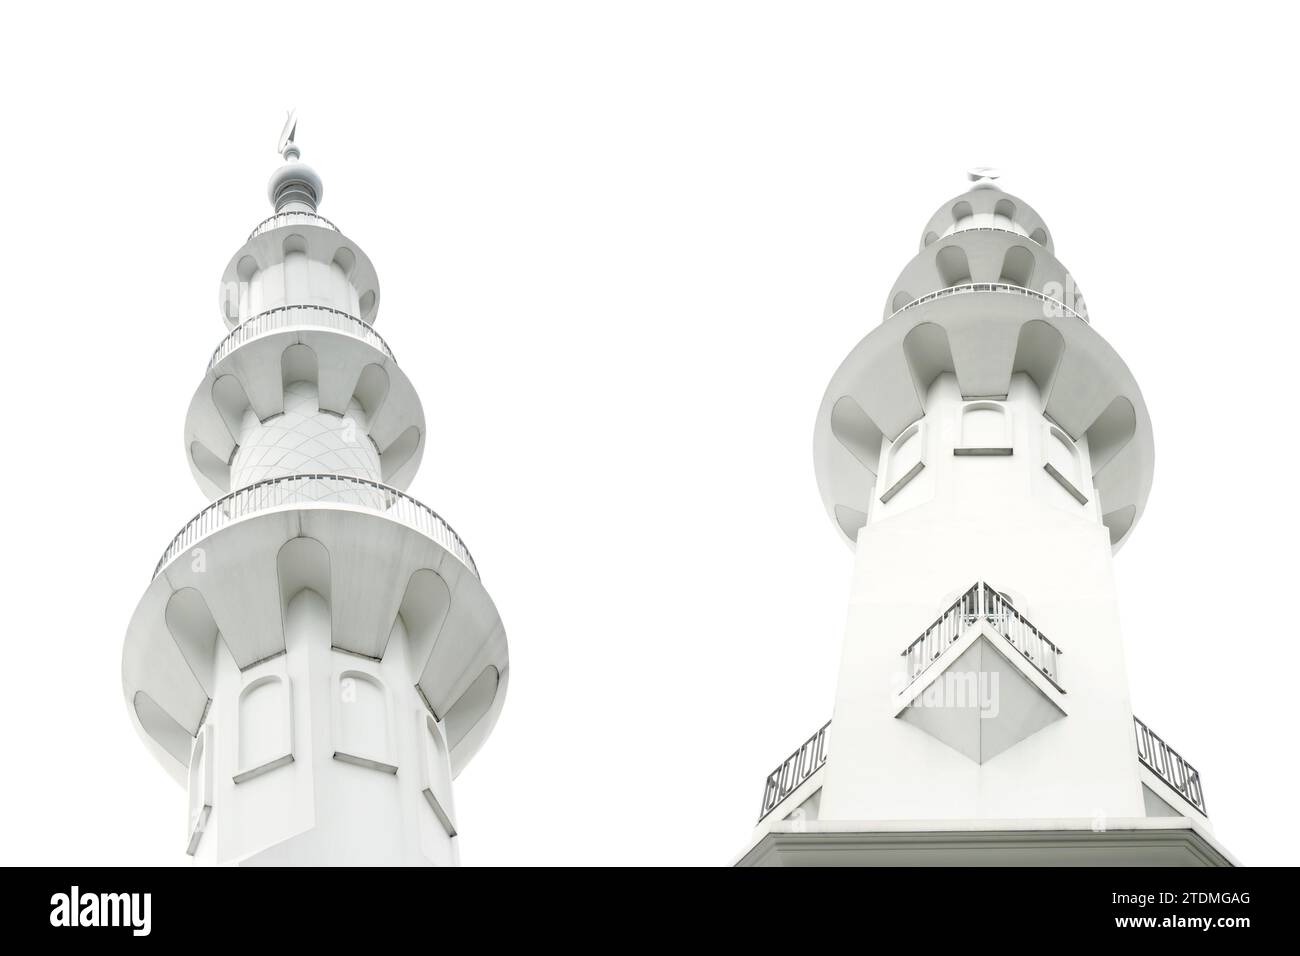 The minaret of the mosque is isolated over a white background Stock Photo